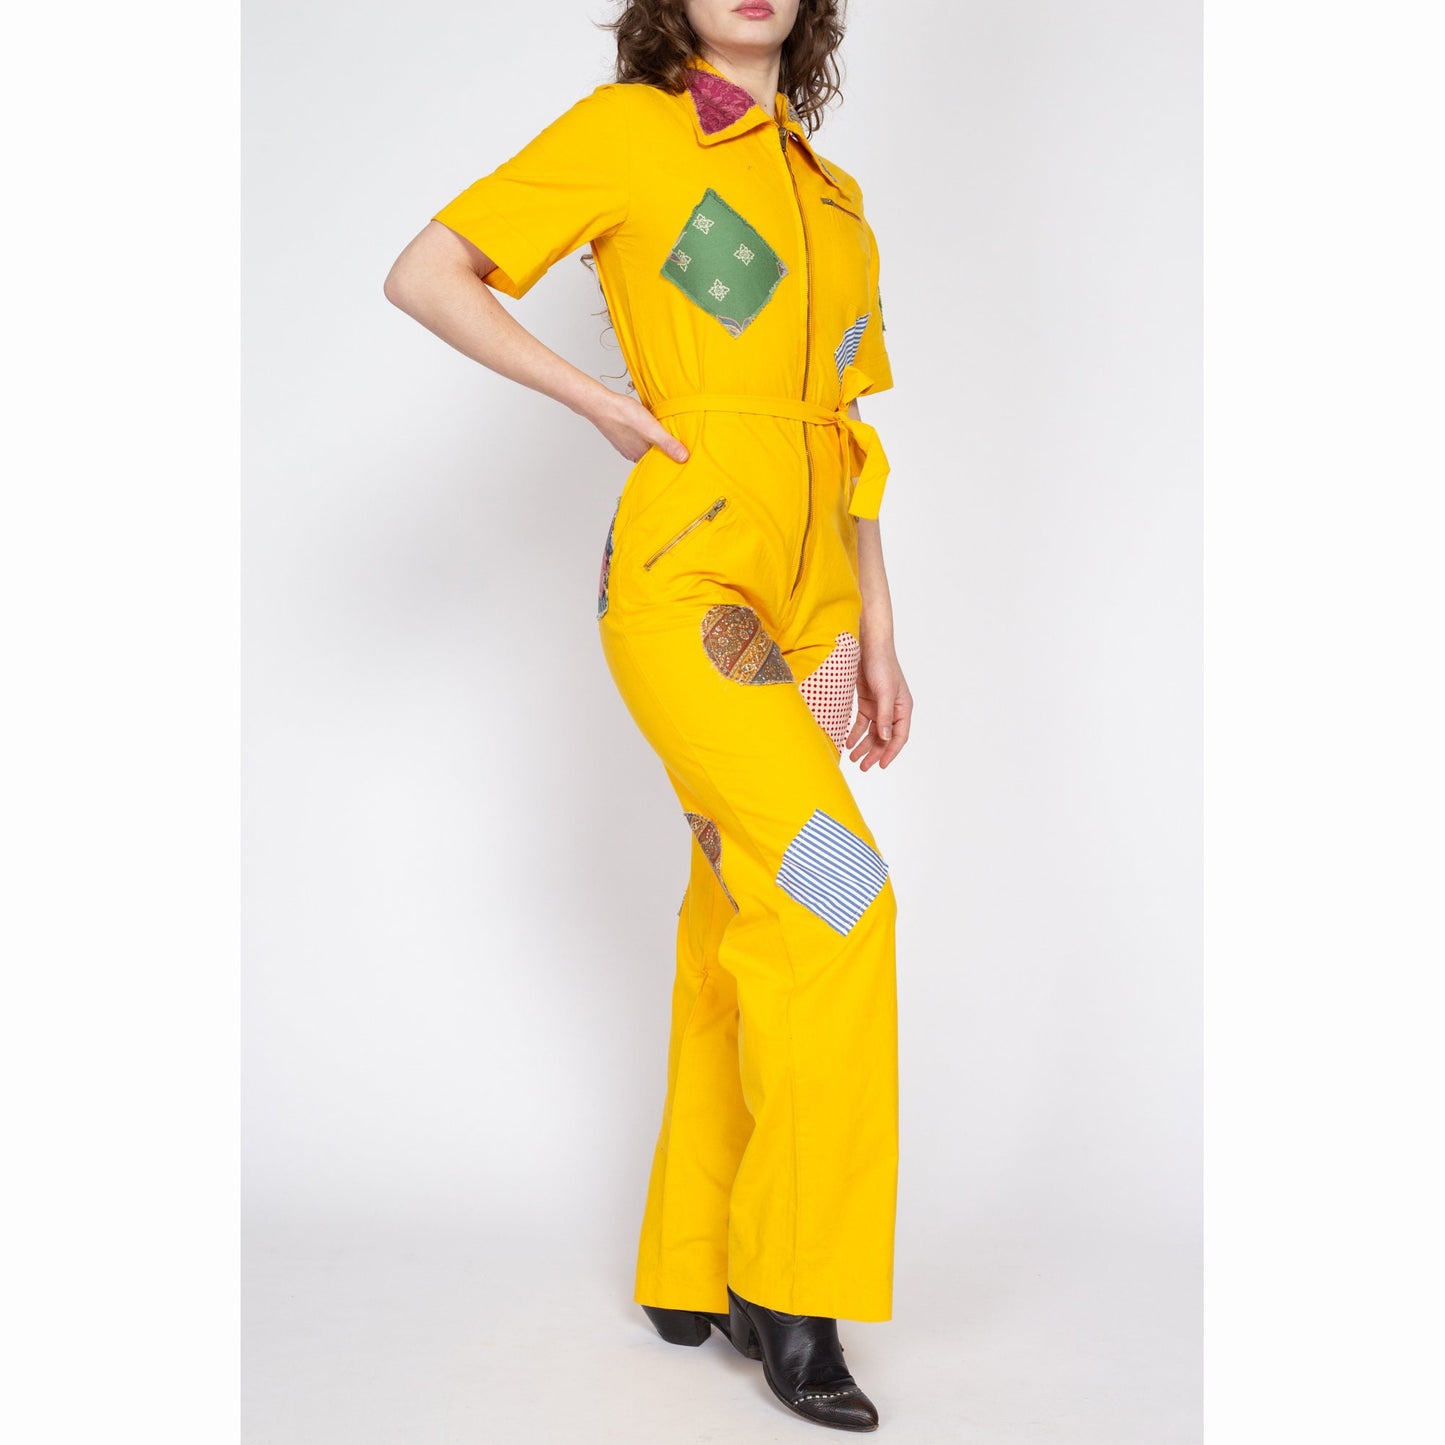 Medium 70s Yellow Patchwork Coverall Jumpsuit | Retro Vintage Collared Straight Leg Zip Up Boiler Suit One Piece Outfit